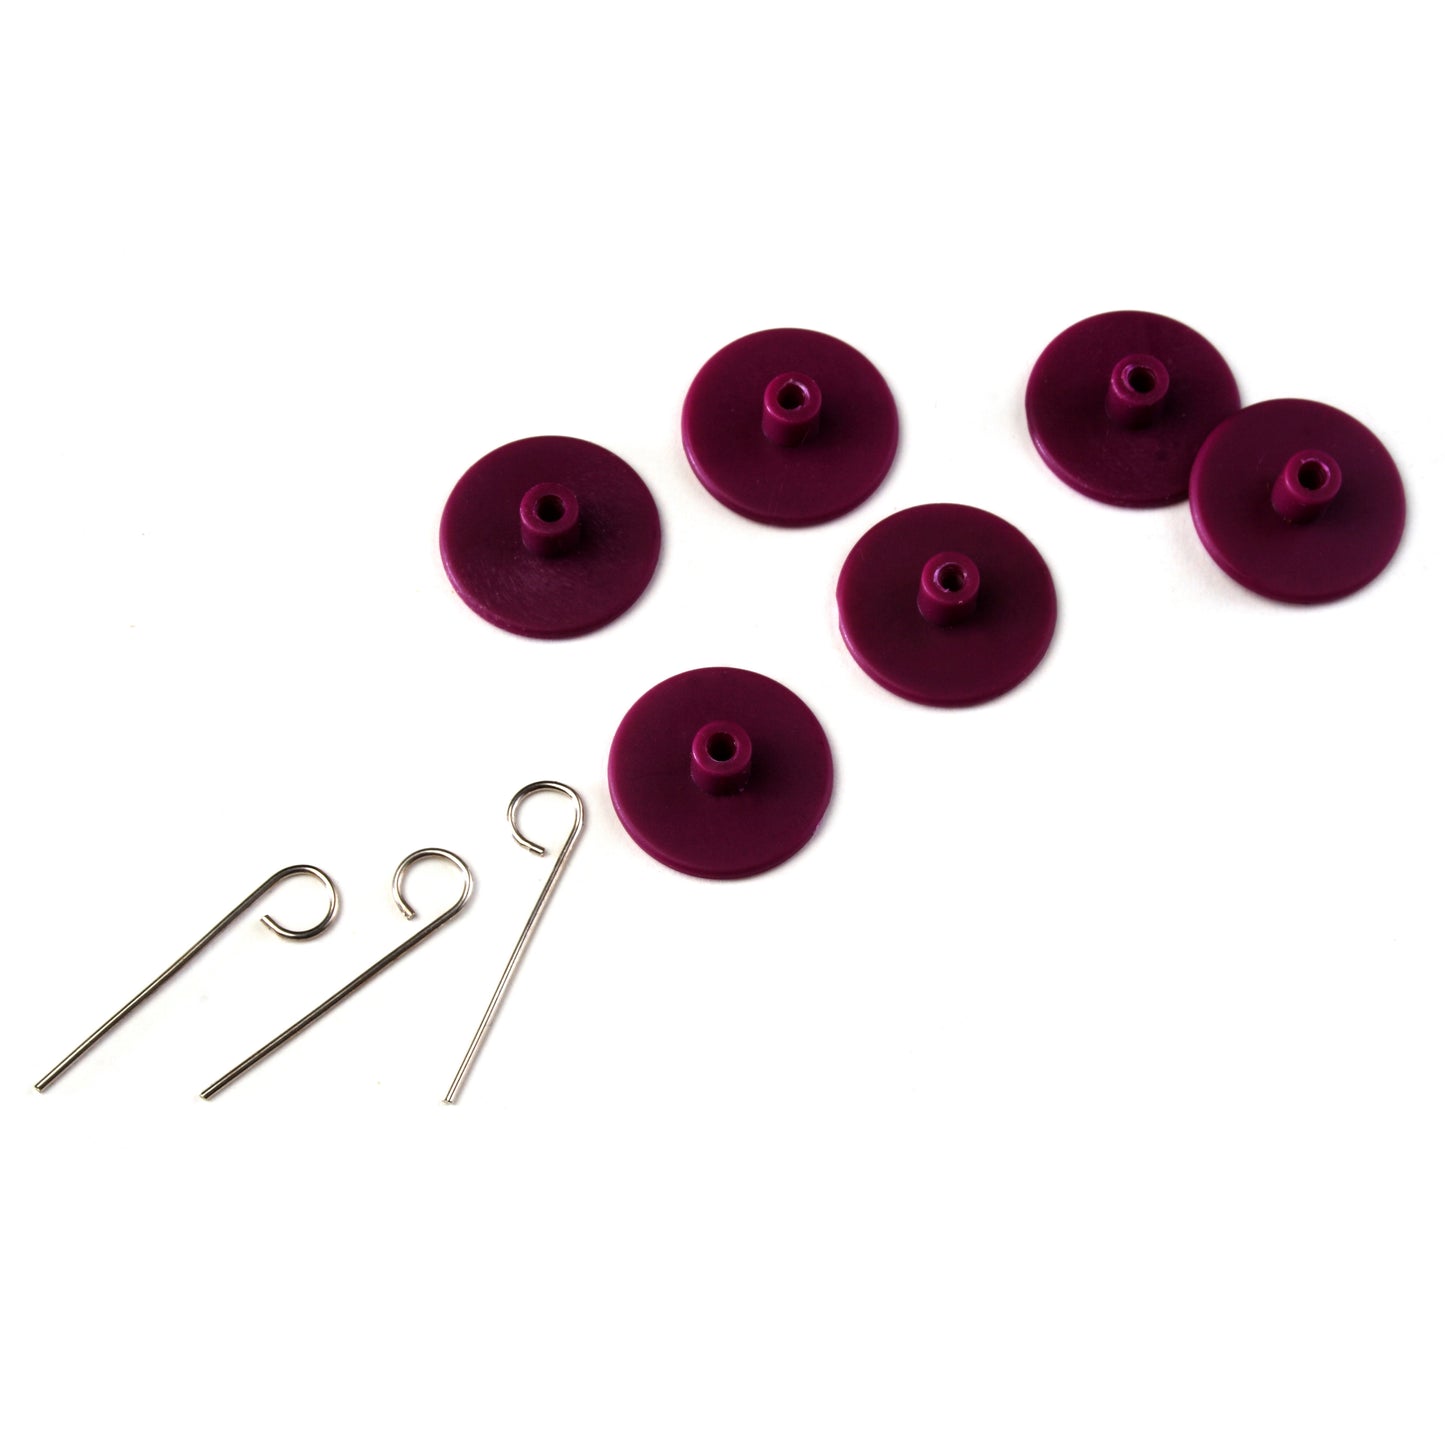 Interchangeable Circular Knitting Needle Cable - Purple by KnitPro